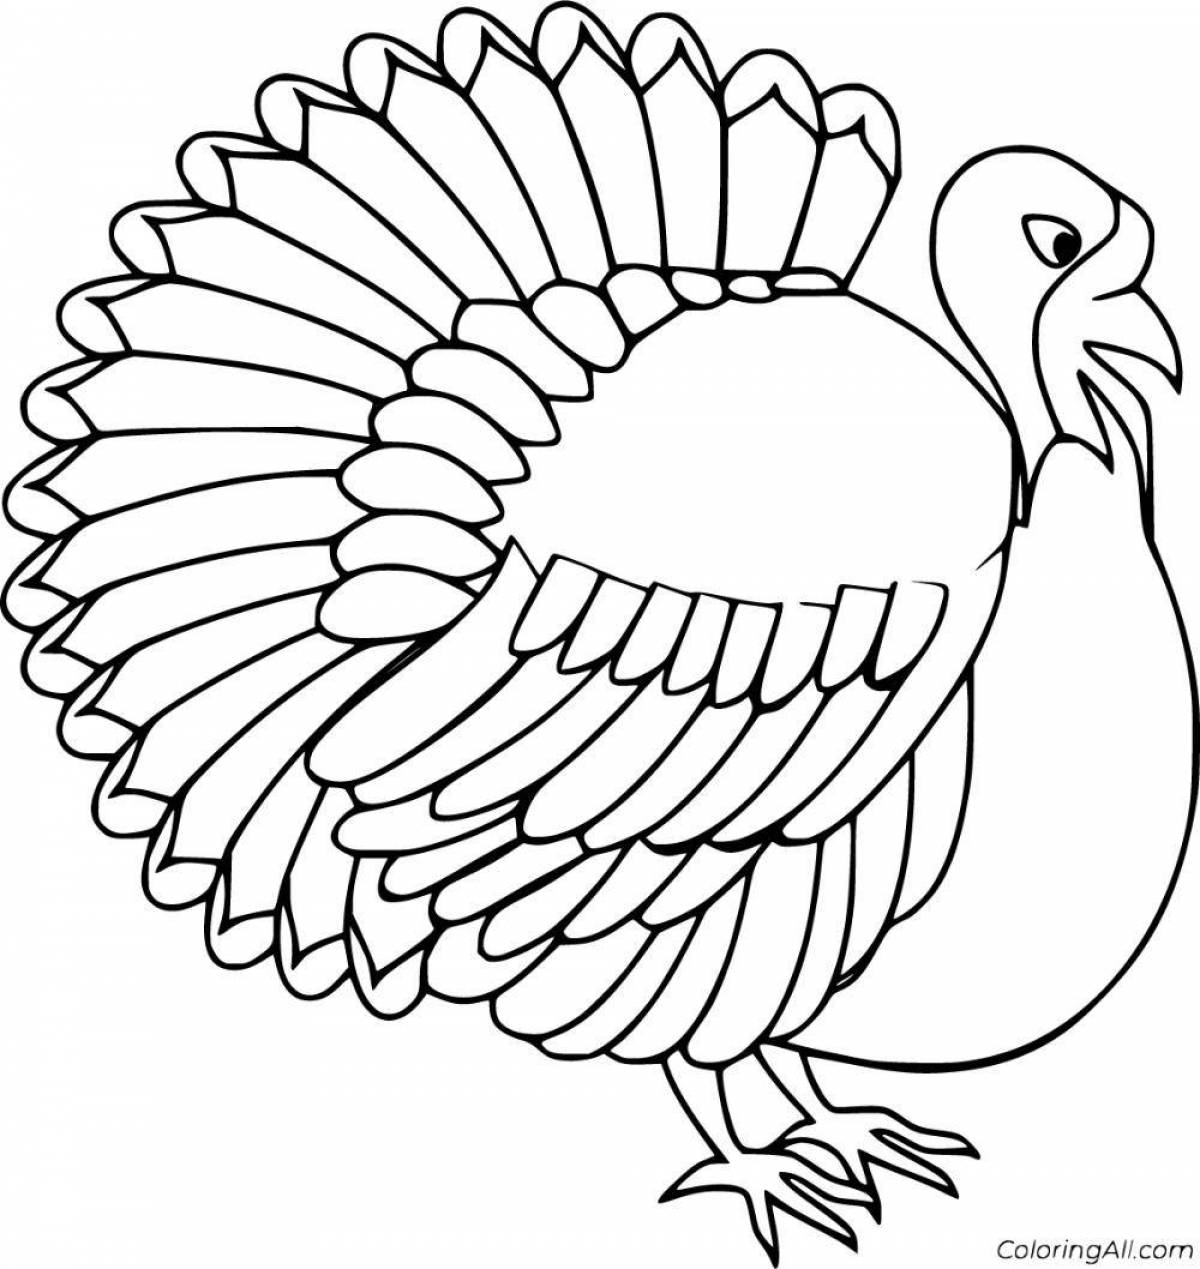 Charming coloring turkey